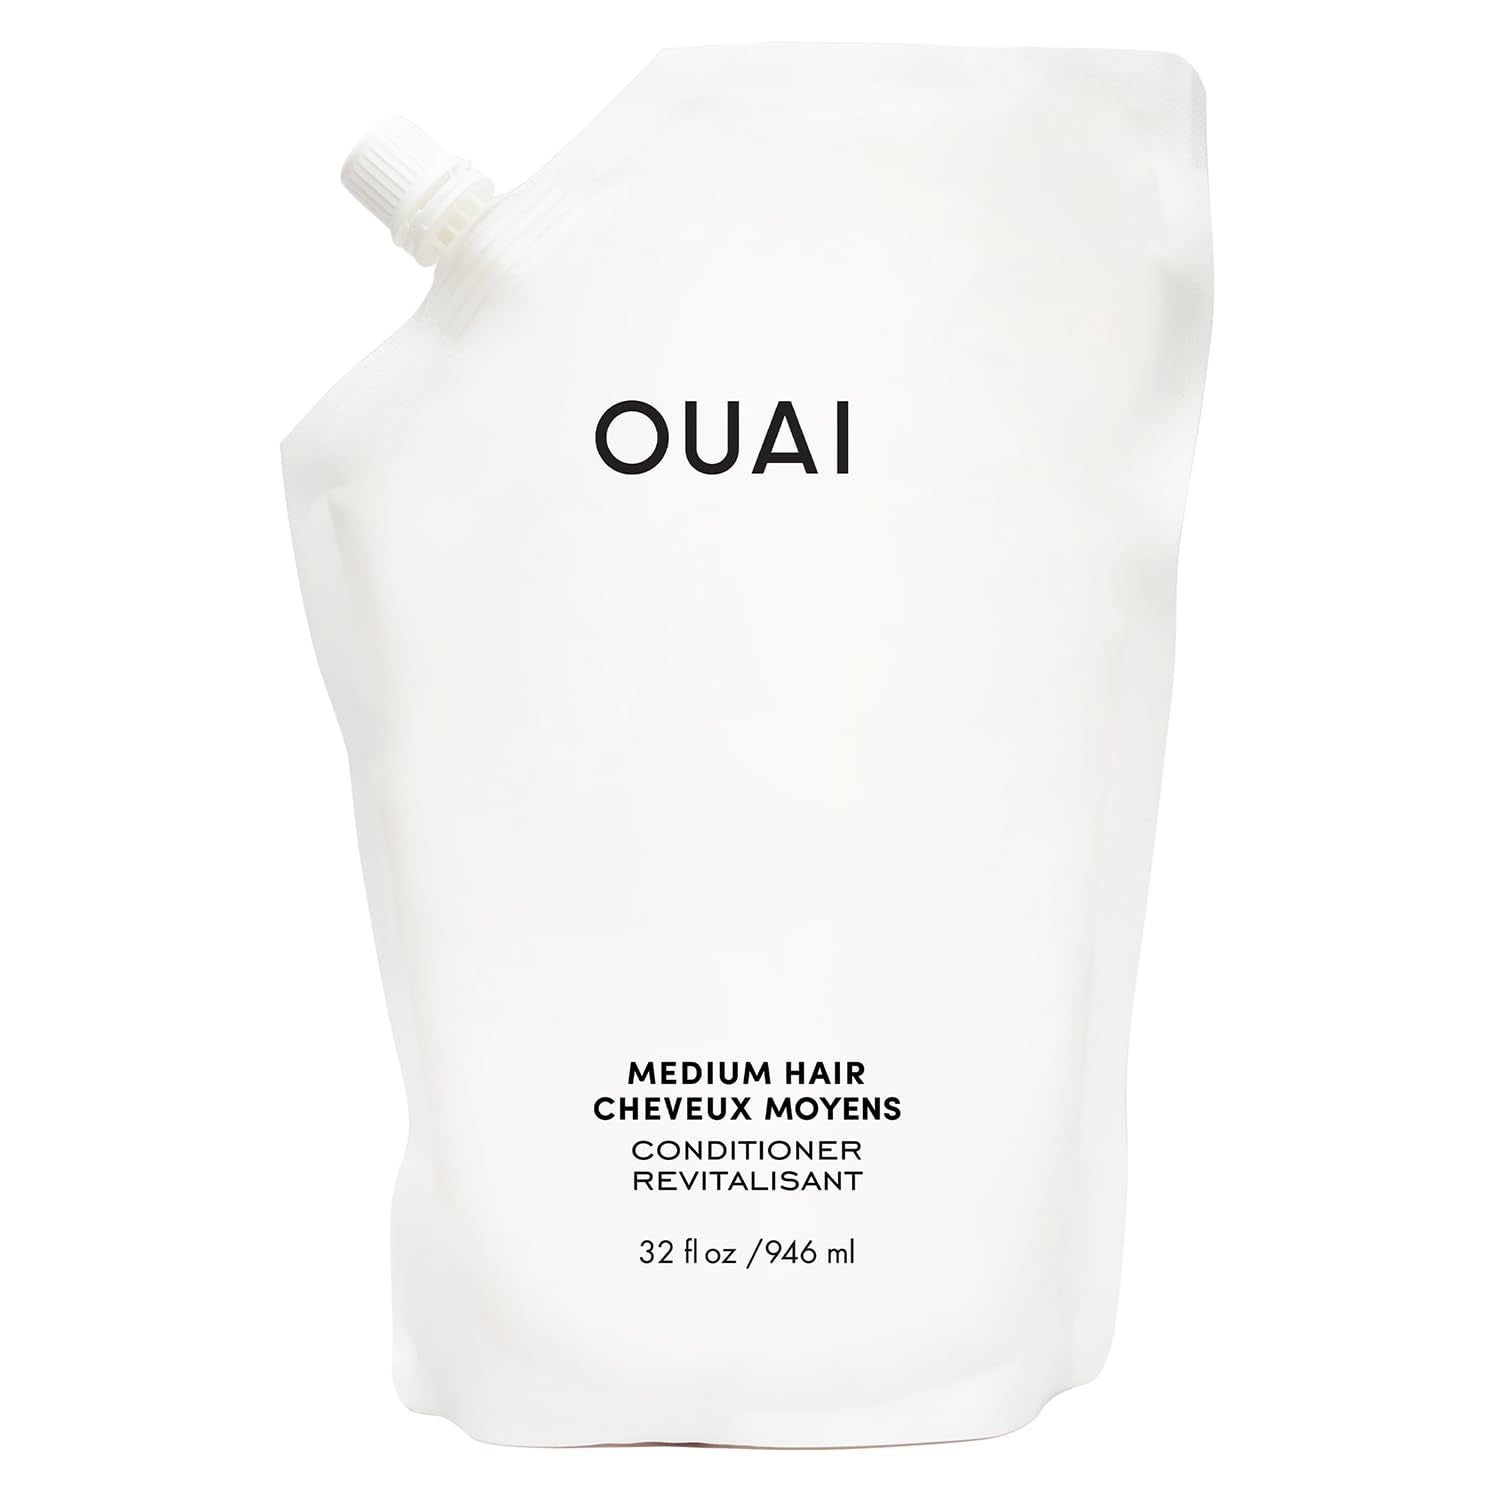 OUAI Medium Conditioner Refill - Hydrating Hair Conditioner with Coconut Oil, Babassu Oil, and Keratin - Strengthens, Repairs and Adds Shine - Paraben and Phthalate Free Hair Care Products - 32 oz